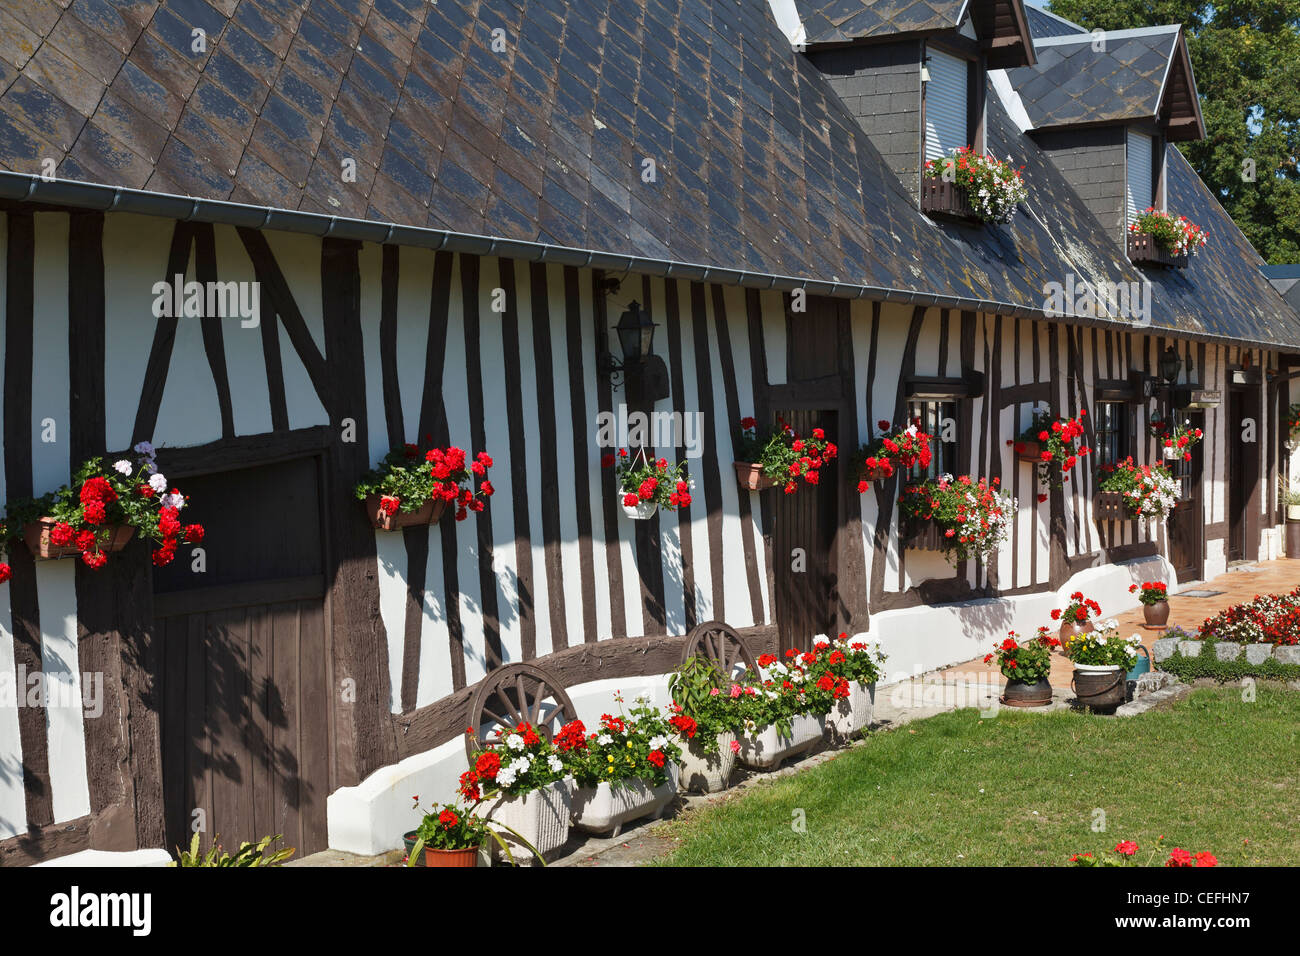 Traditional half-timbered Normandy farmhouse at Jumièges, Normandy, France Stock Photo